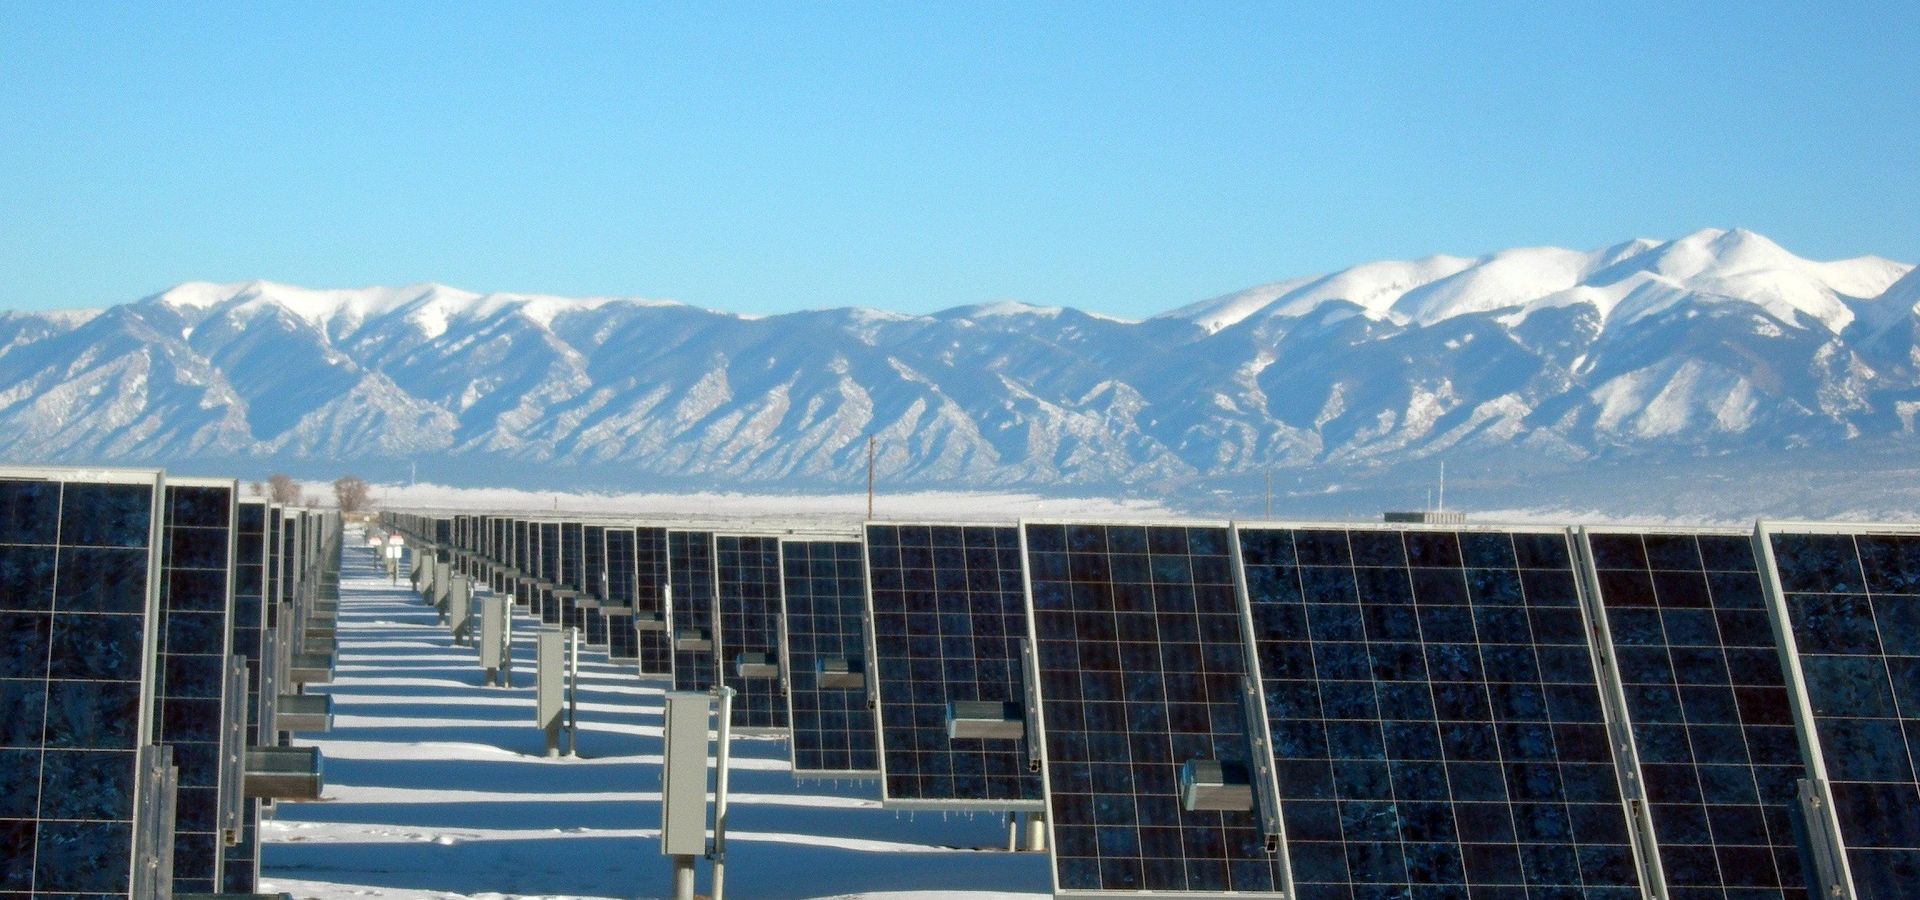 solar panels in ice and snow